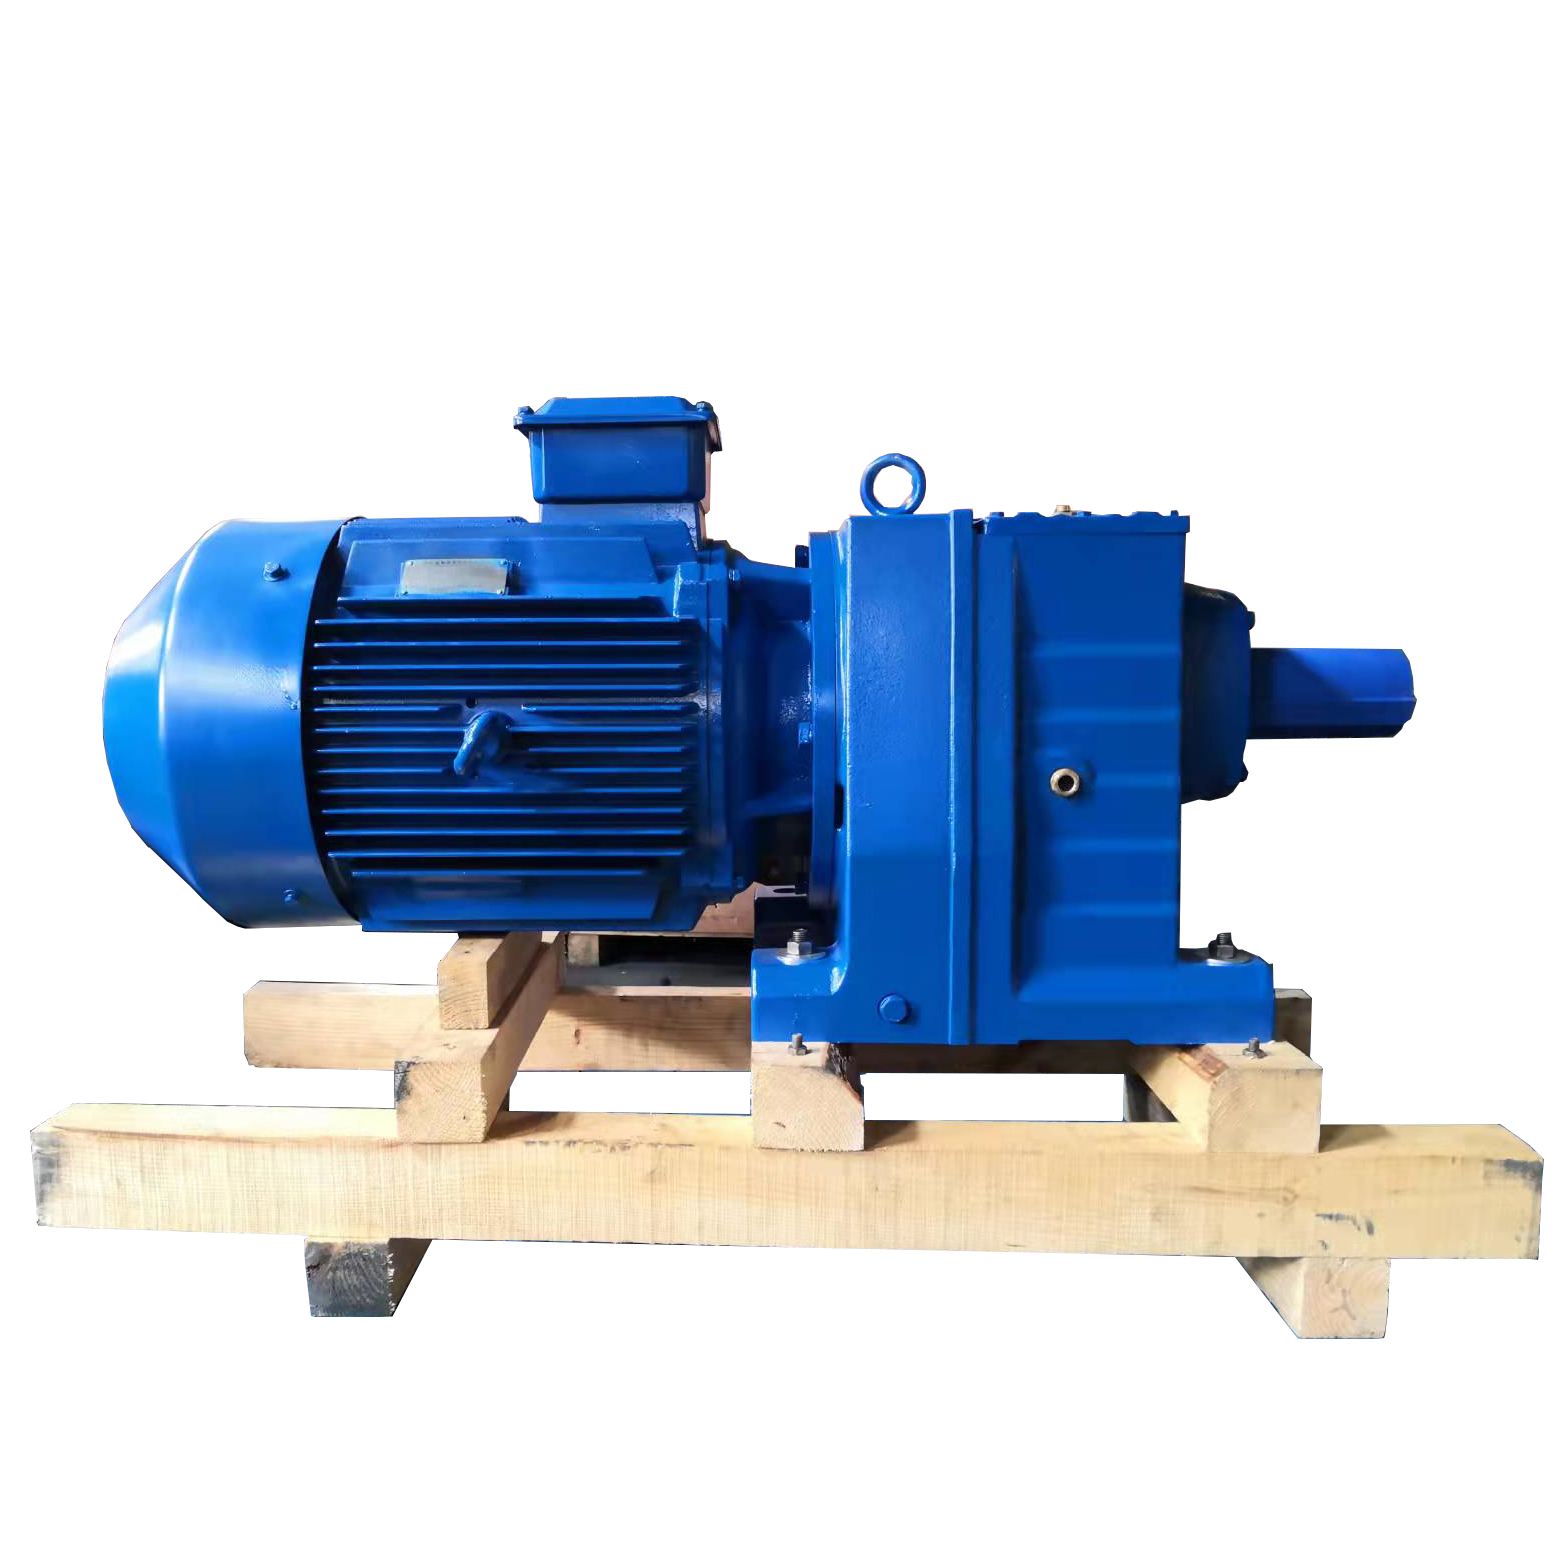 Ratio 1 2  high efficiency R series foot-mounted Coaxial shaft gearbox motores con reductora